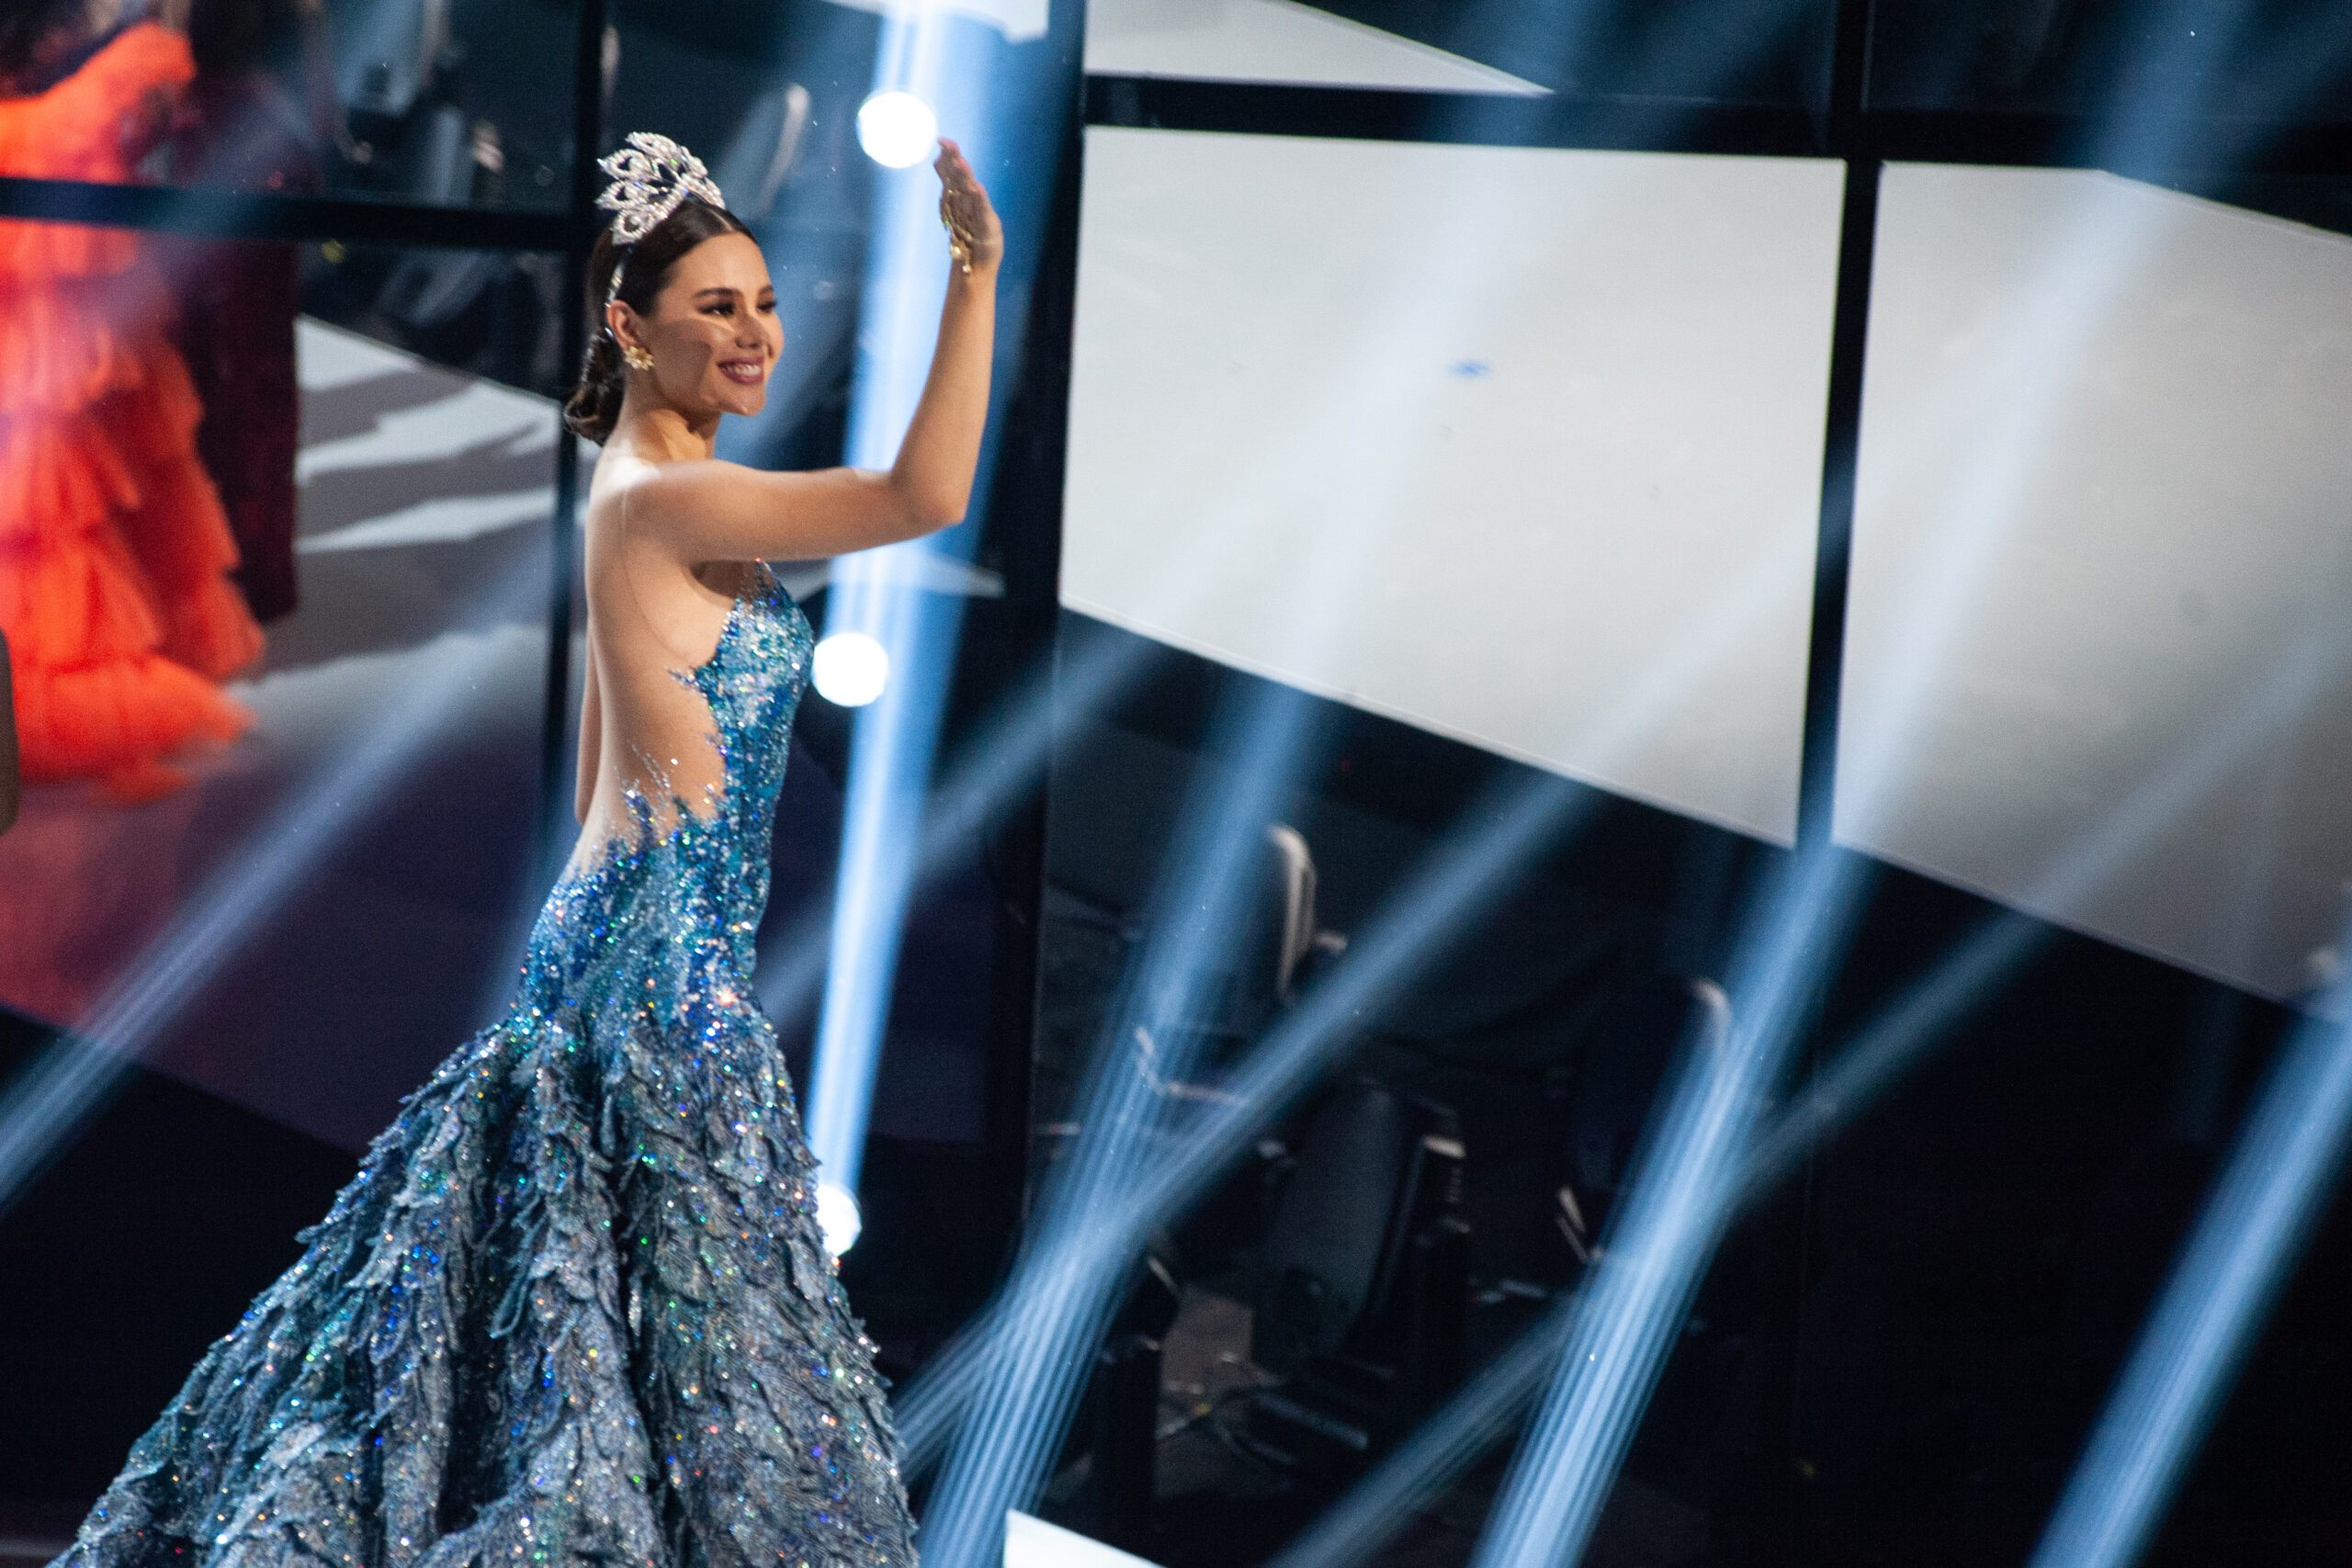 HIGHLIGHTS: Catriona Gray’s reign as Miss Universe 2018